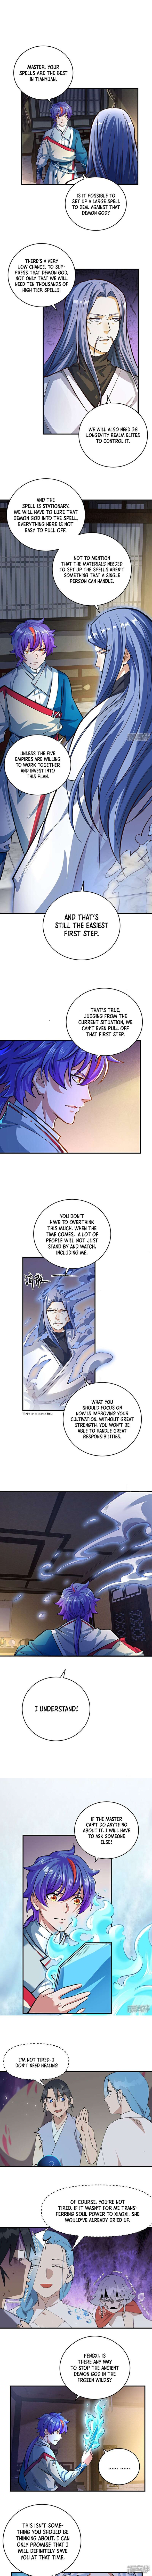 Martial Arts Reigns chapter 631 page 1